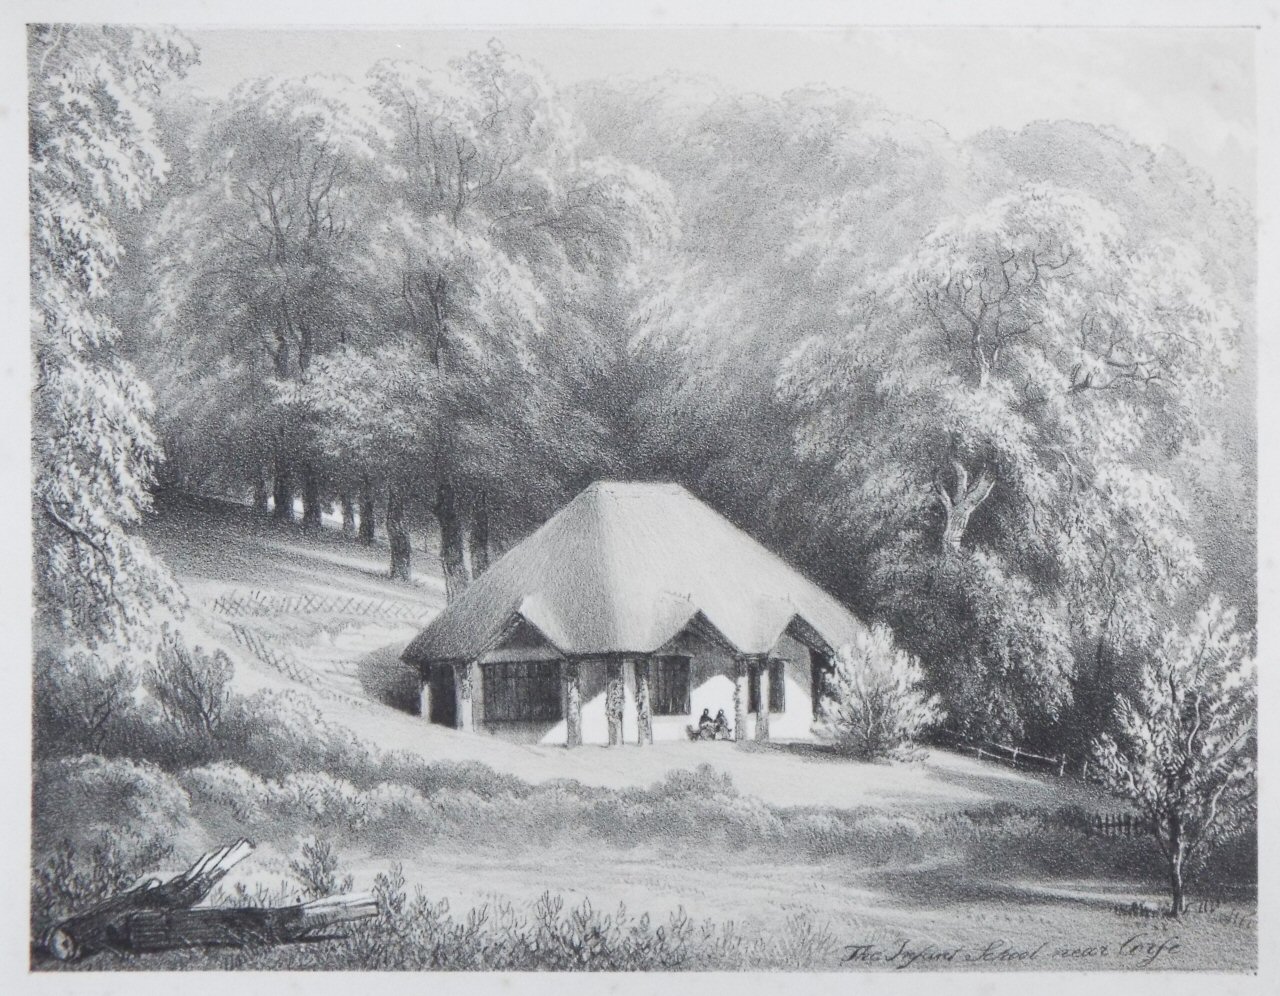 Lithograph - The Infant School near Corfe